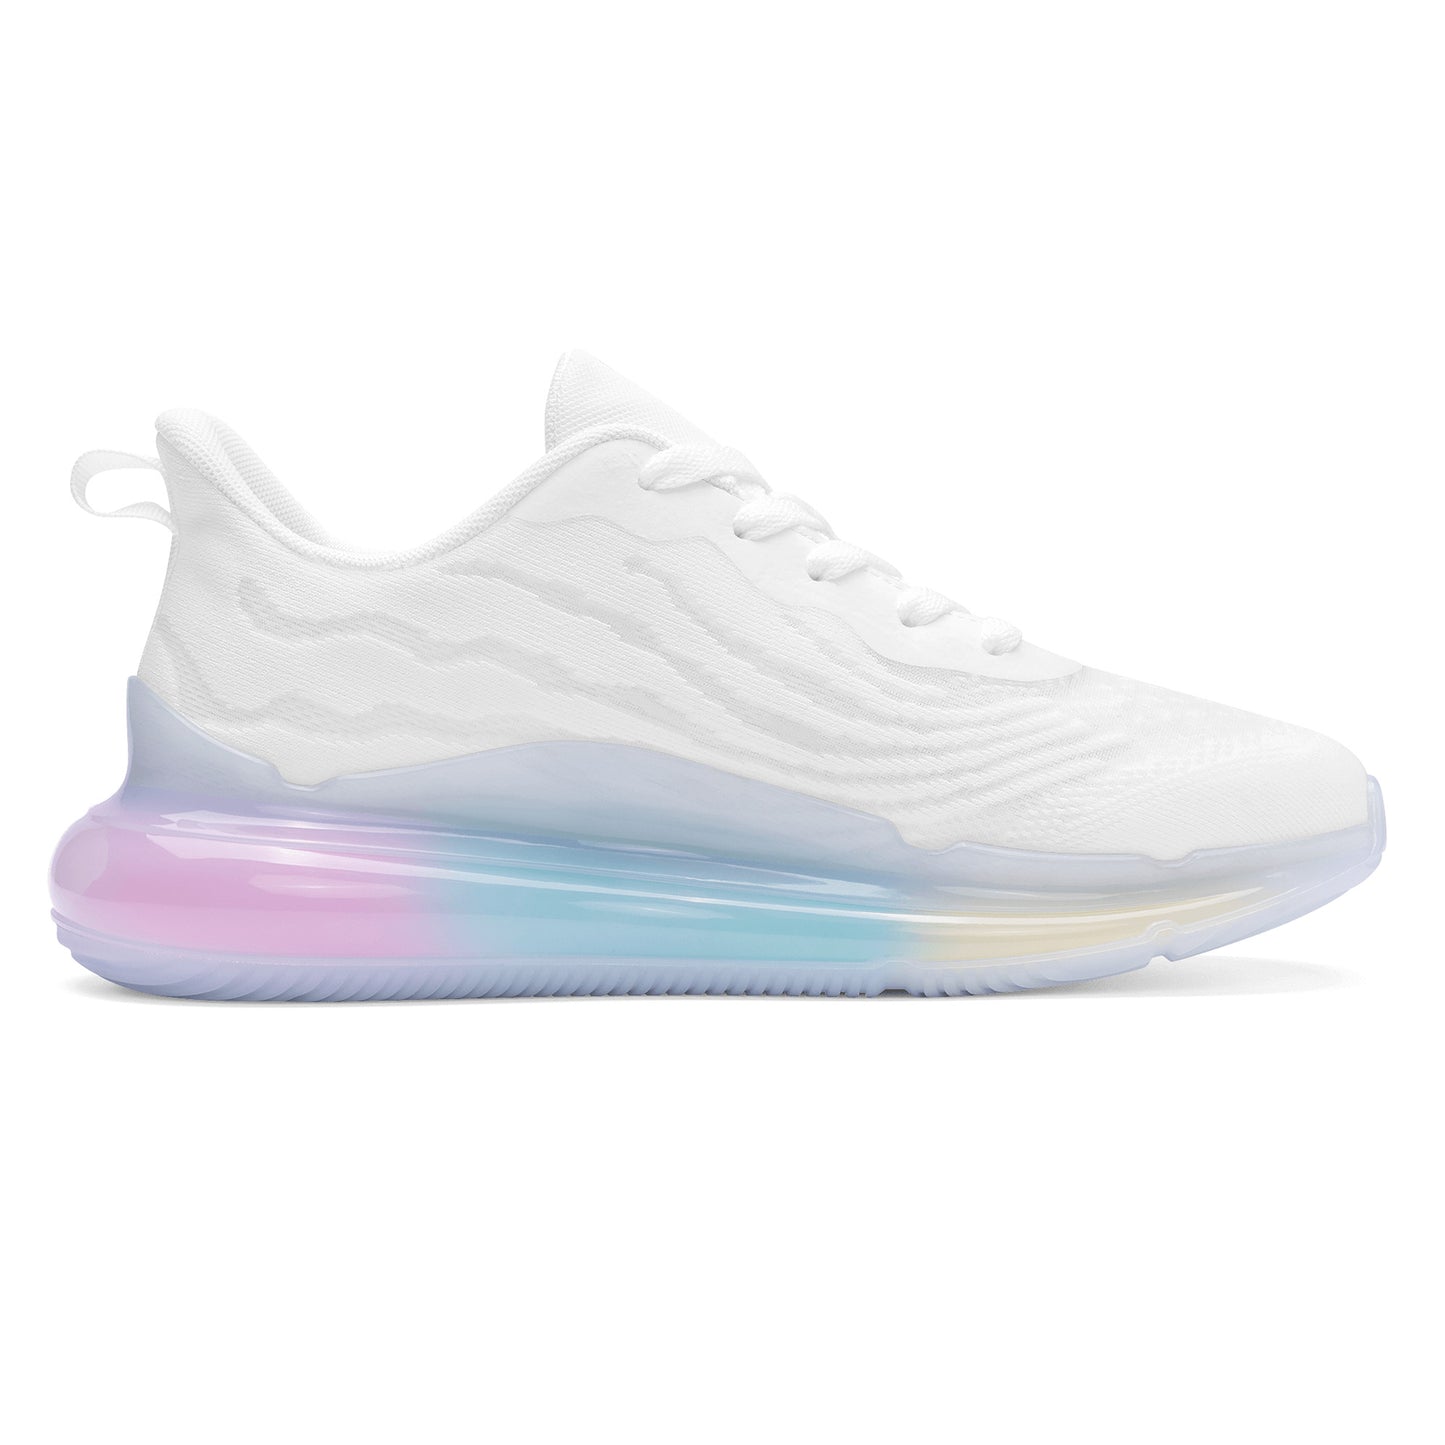 Create Your Own - Women's Rainbow Sole Running Shoes